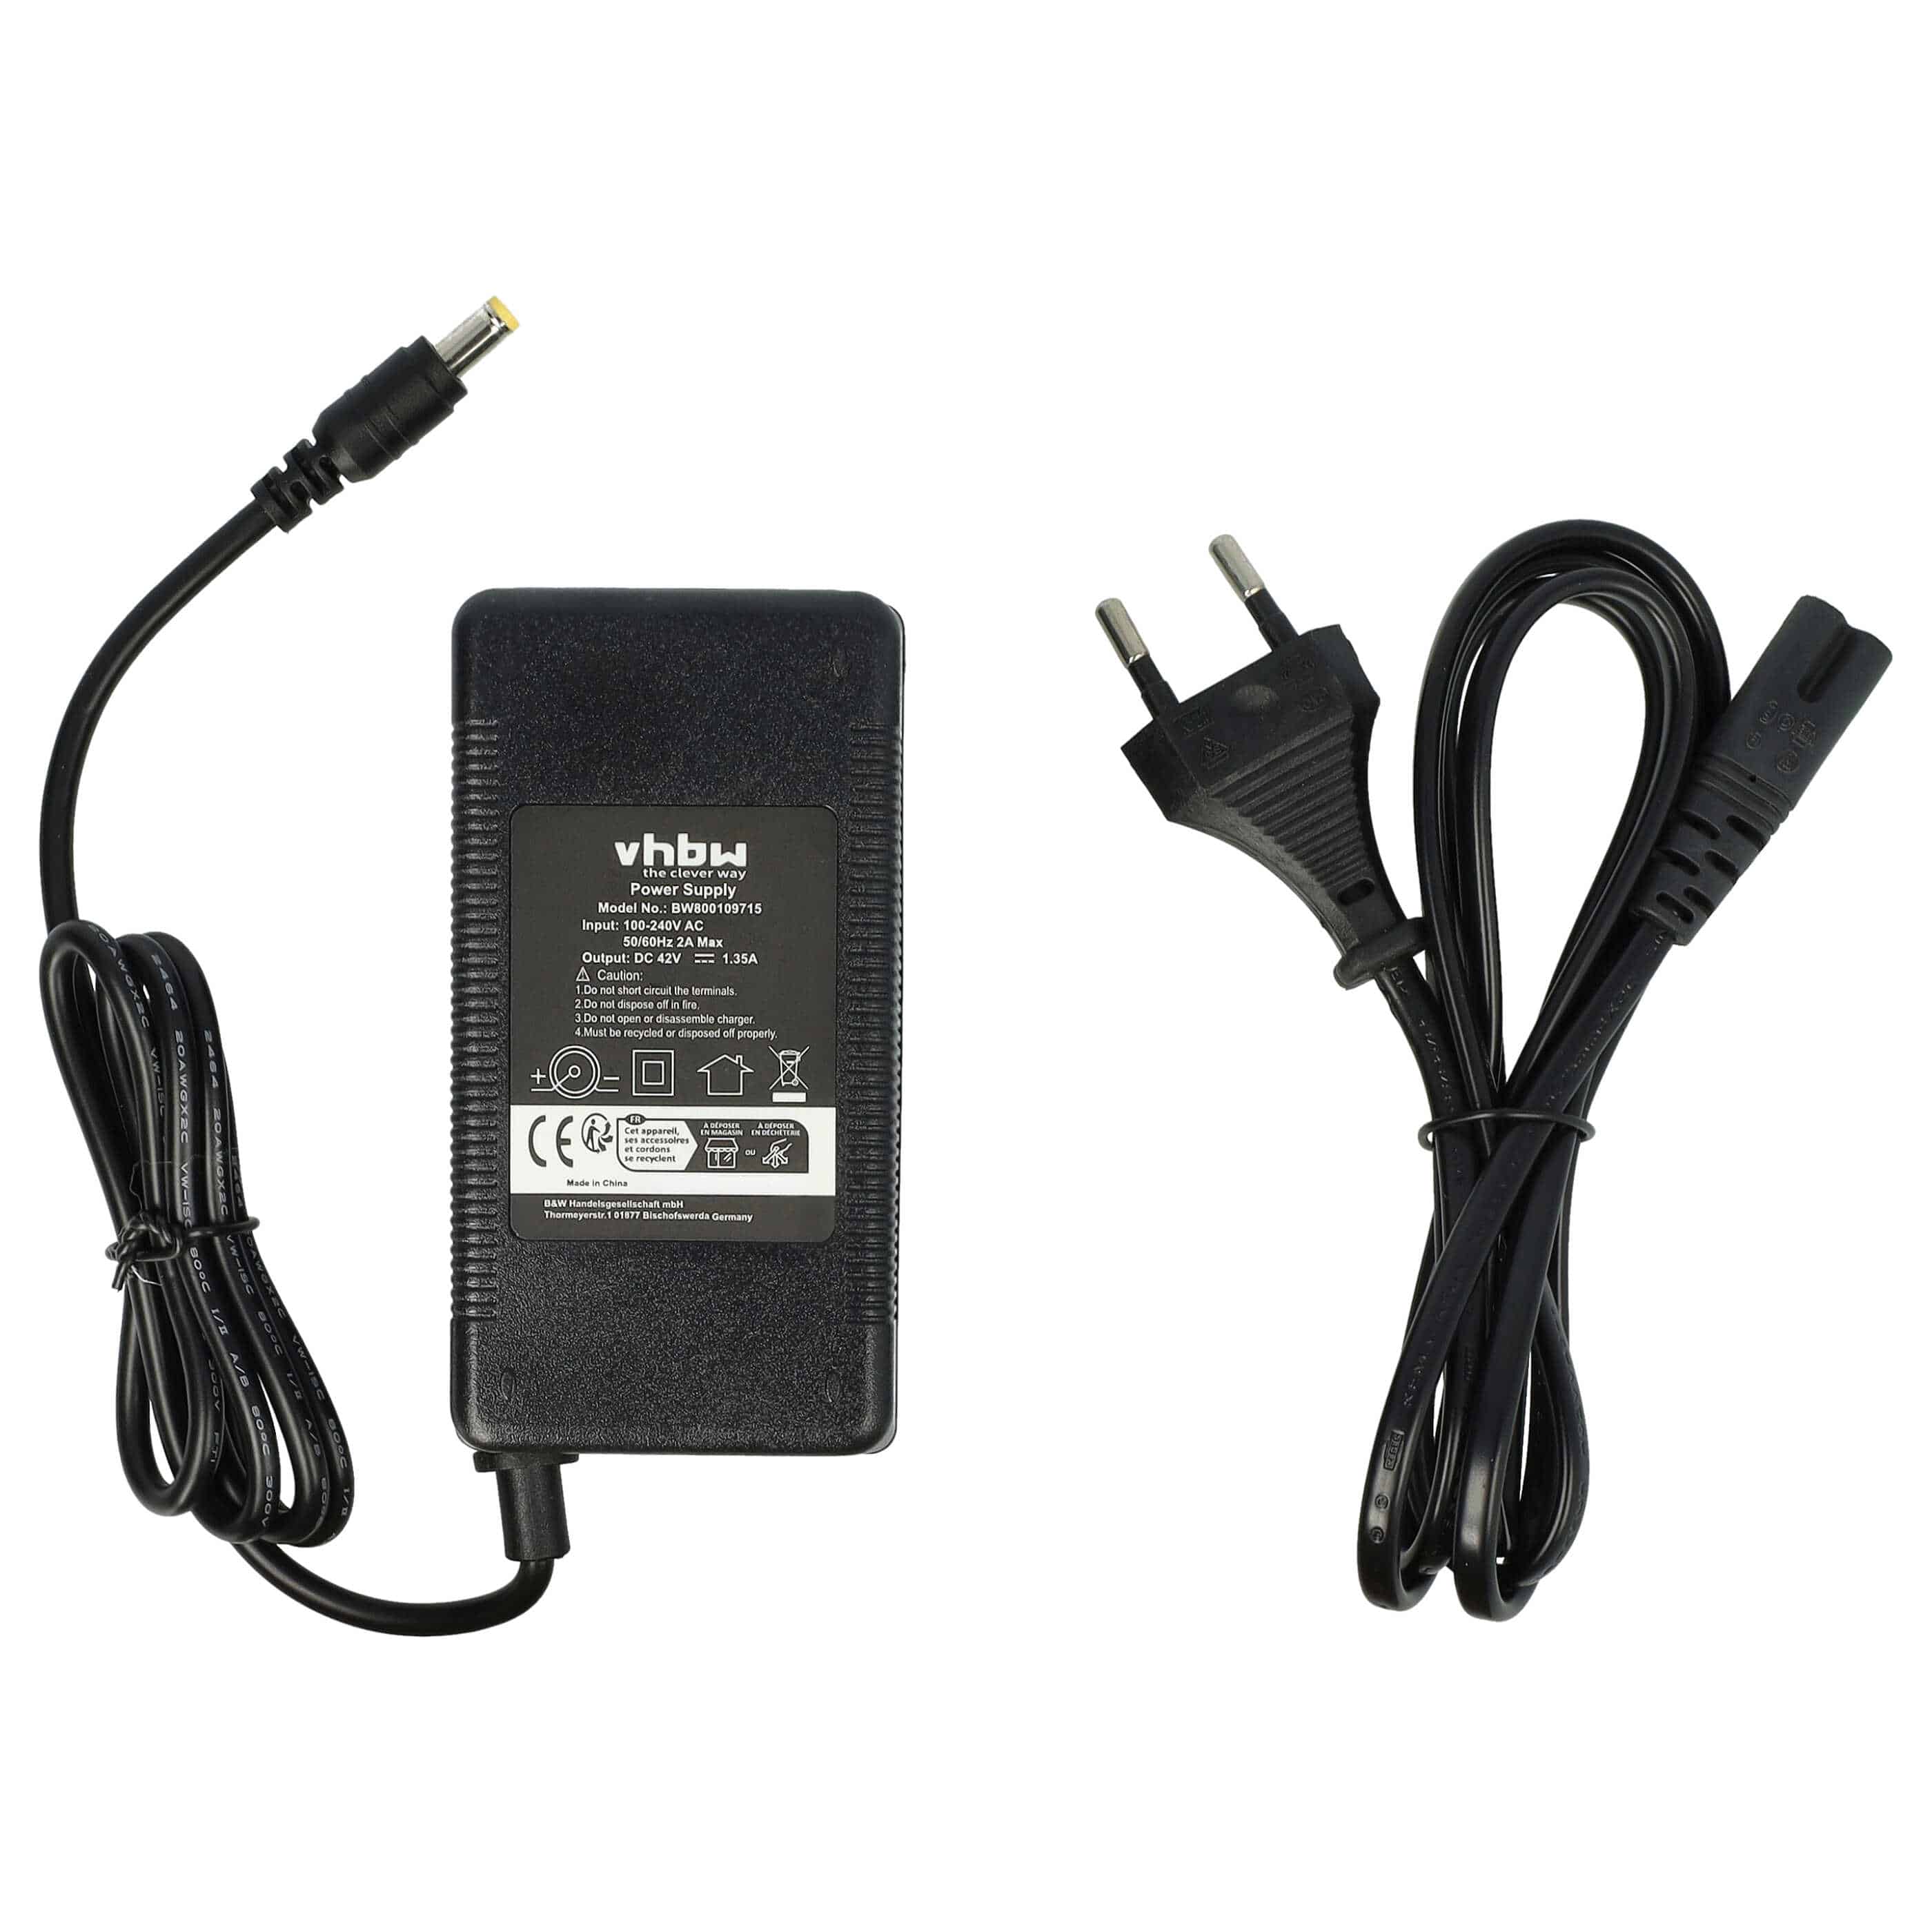 Charger replaces ACK4201 for Li-Ion E-Bike Battery etc. - For 36 V Batteries, With Round Plug, 1.35 A